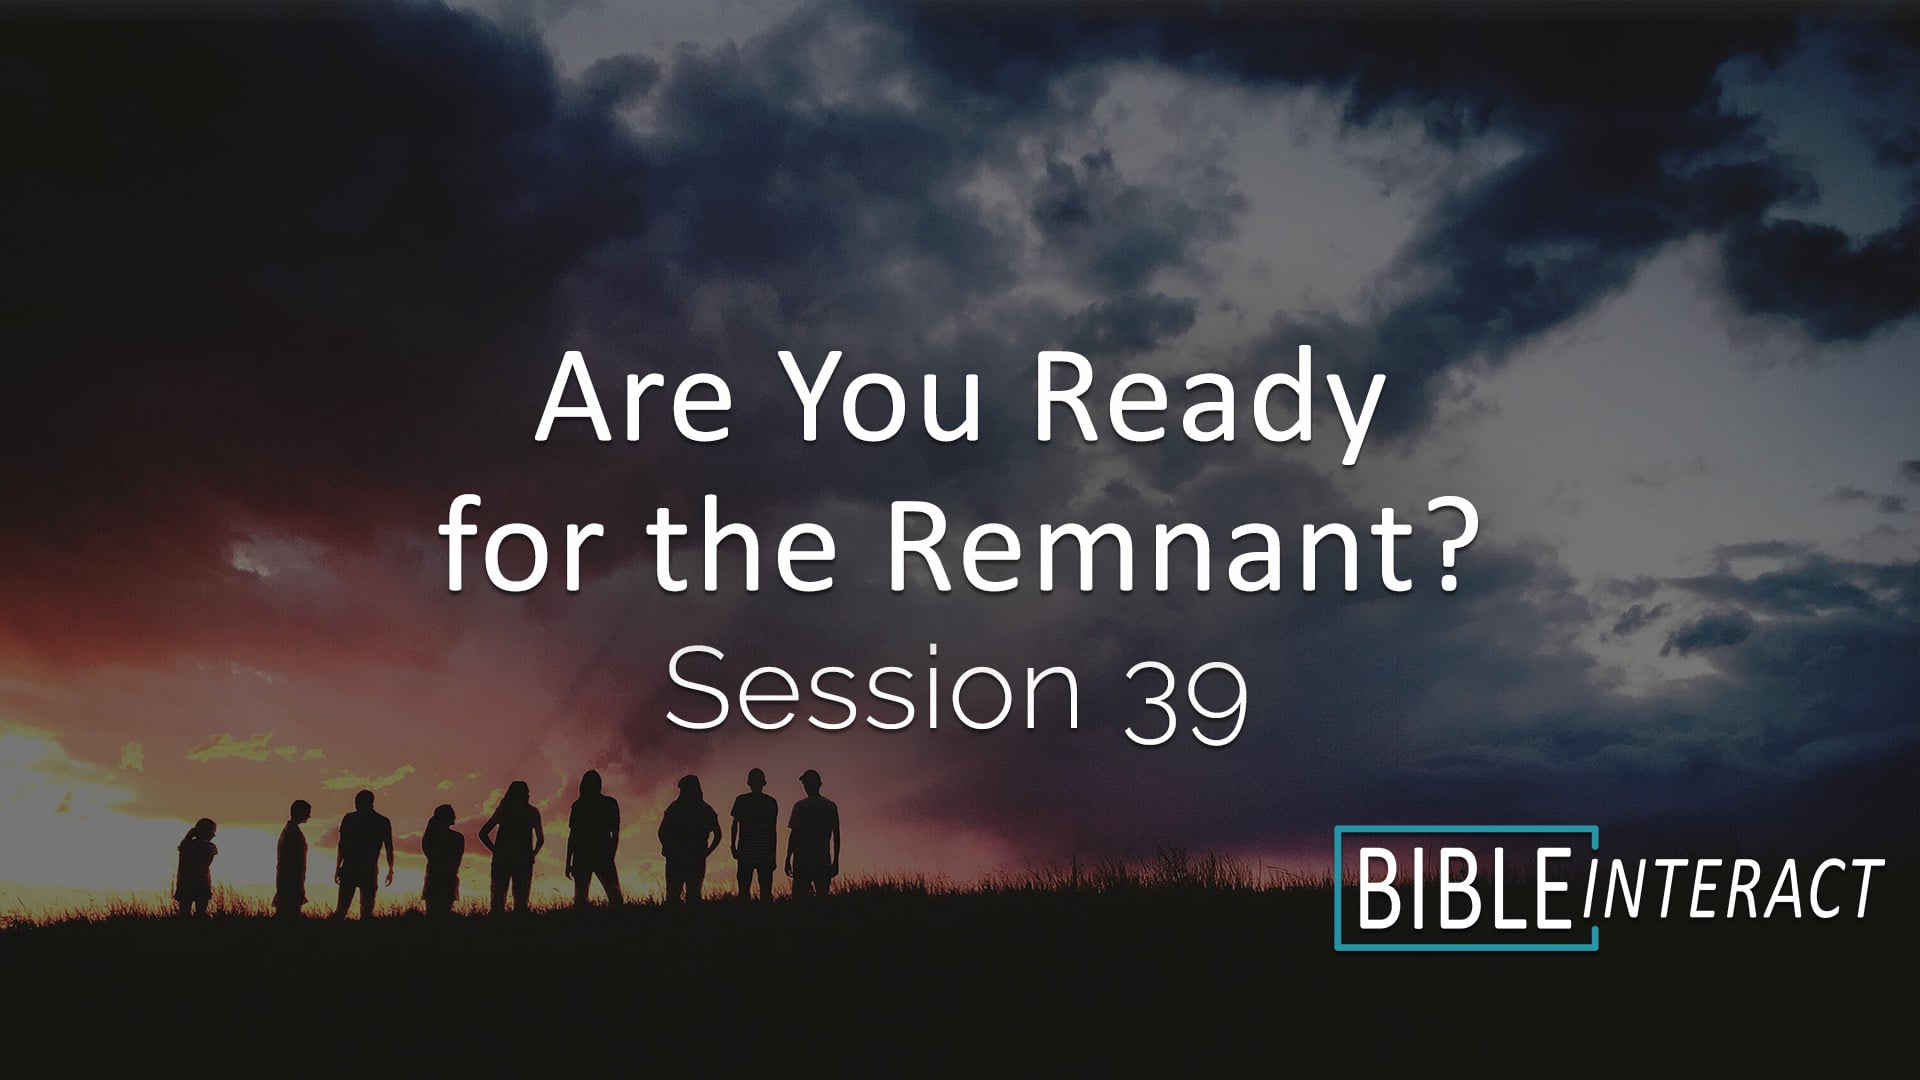 Are You Ready for the Remnant Session 39